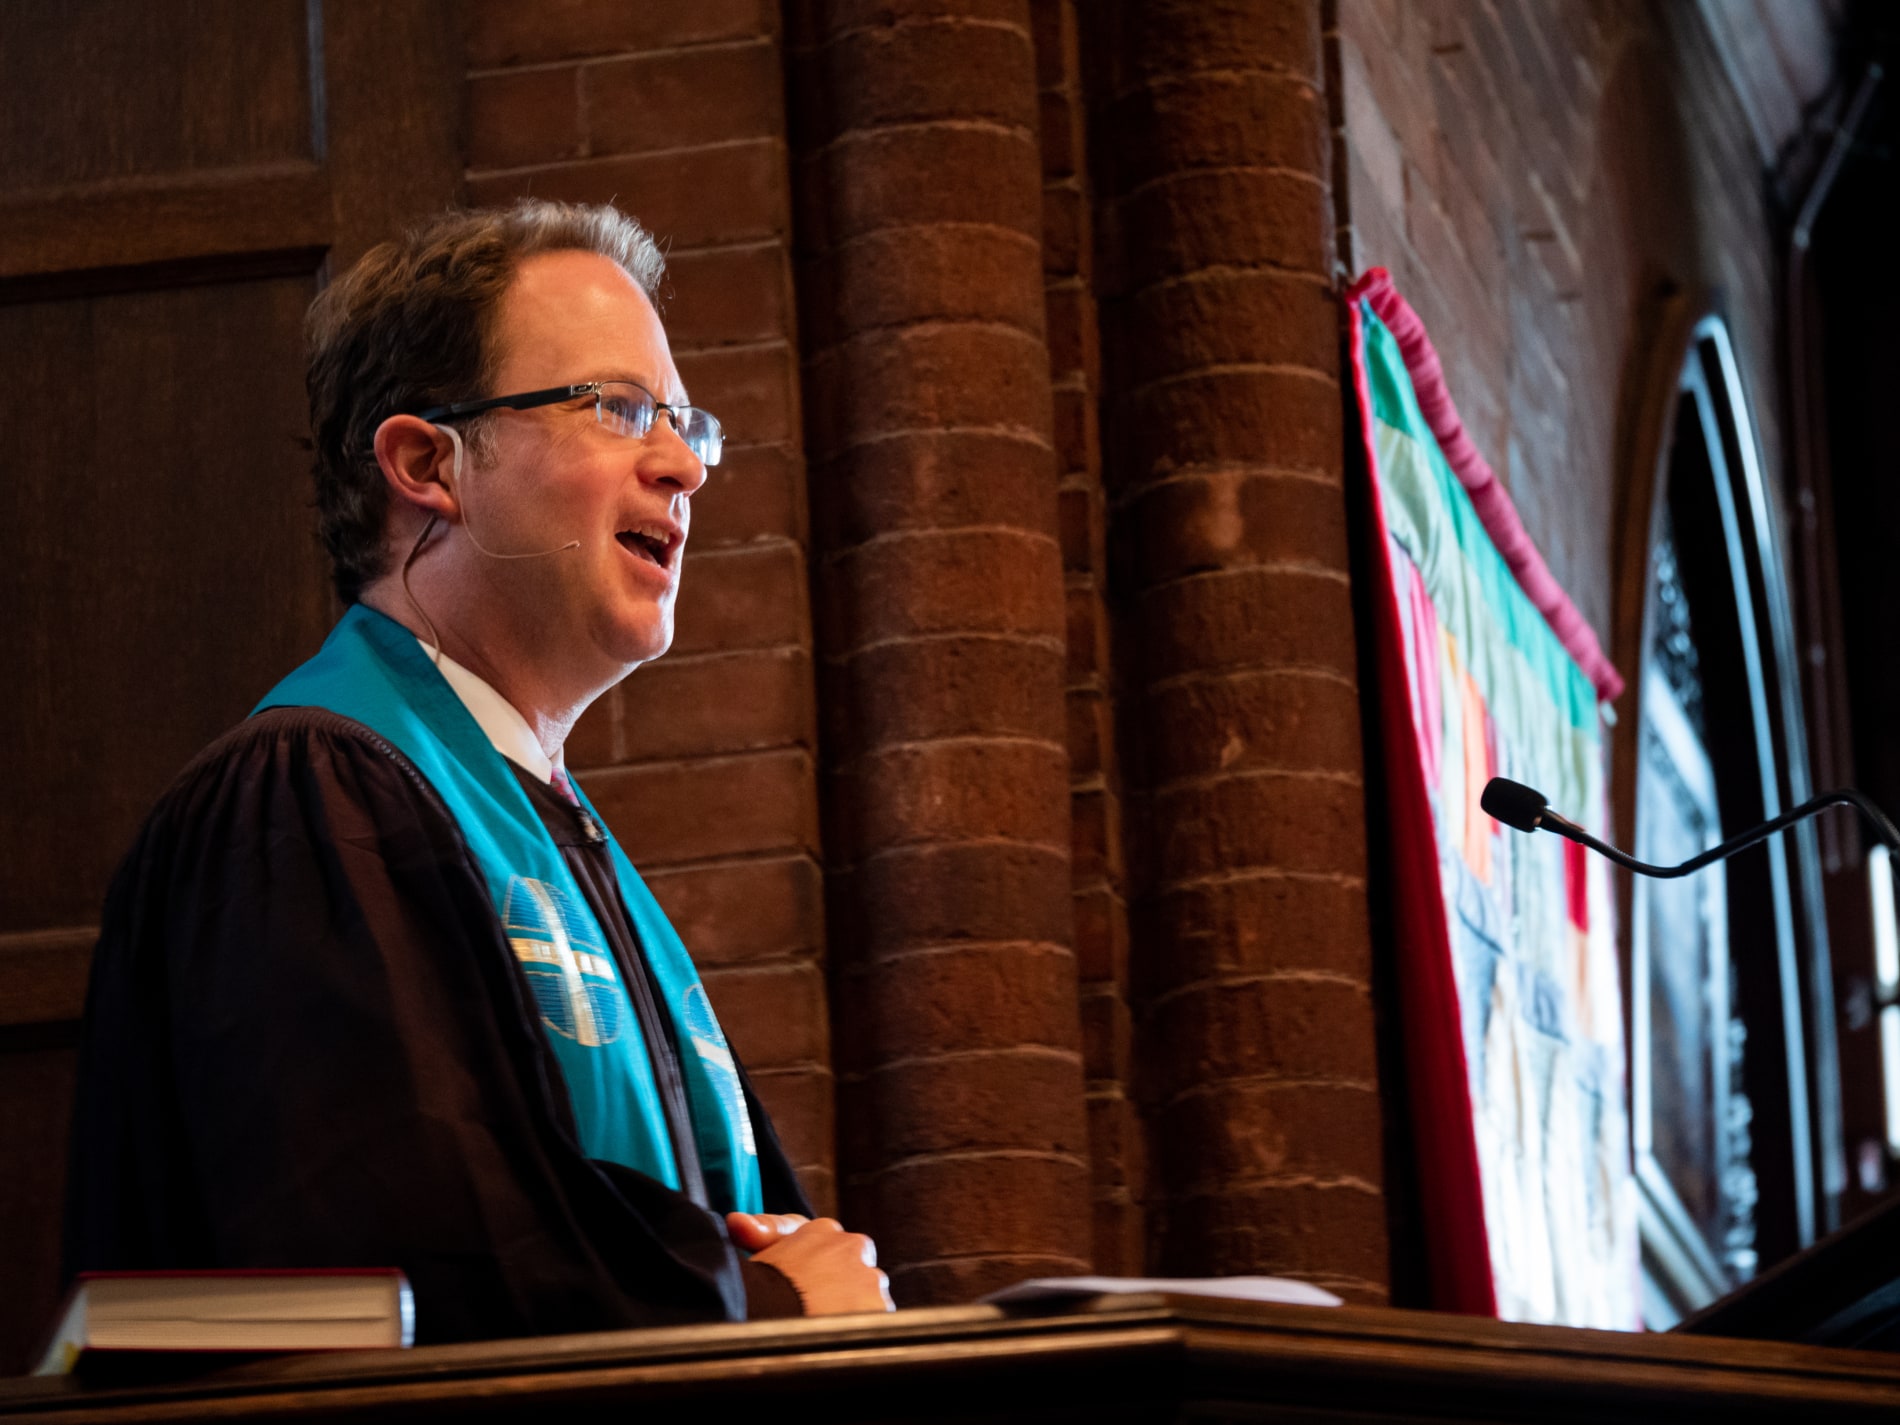 Rev. Jeff Barz-Snell preaches from the pulpit